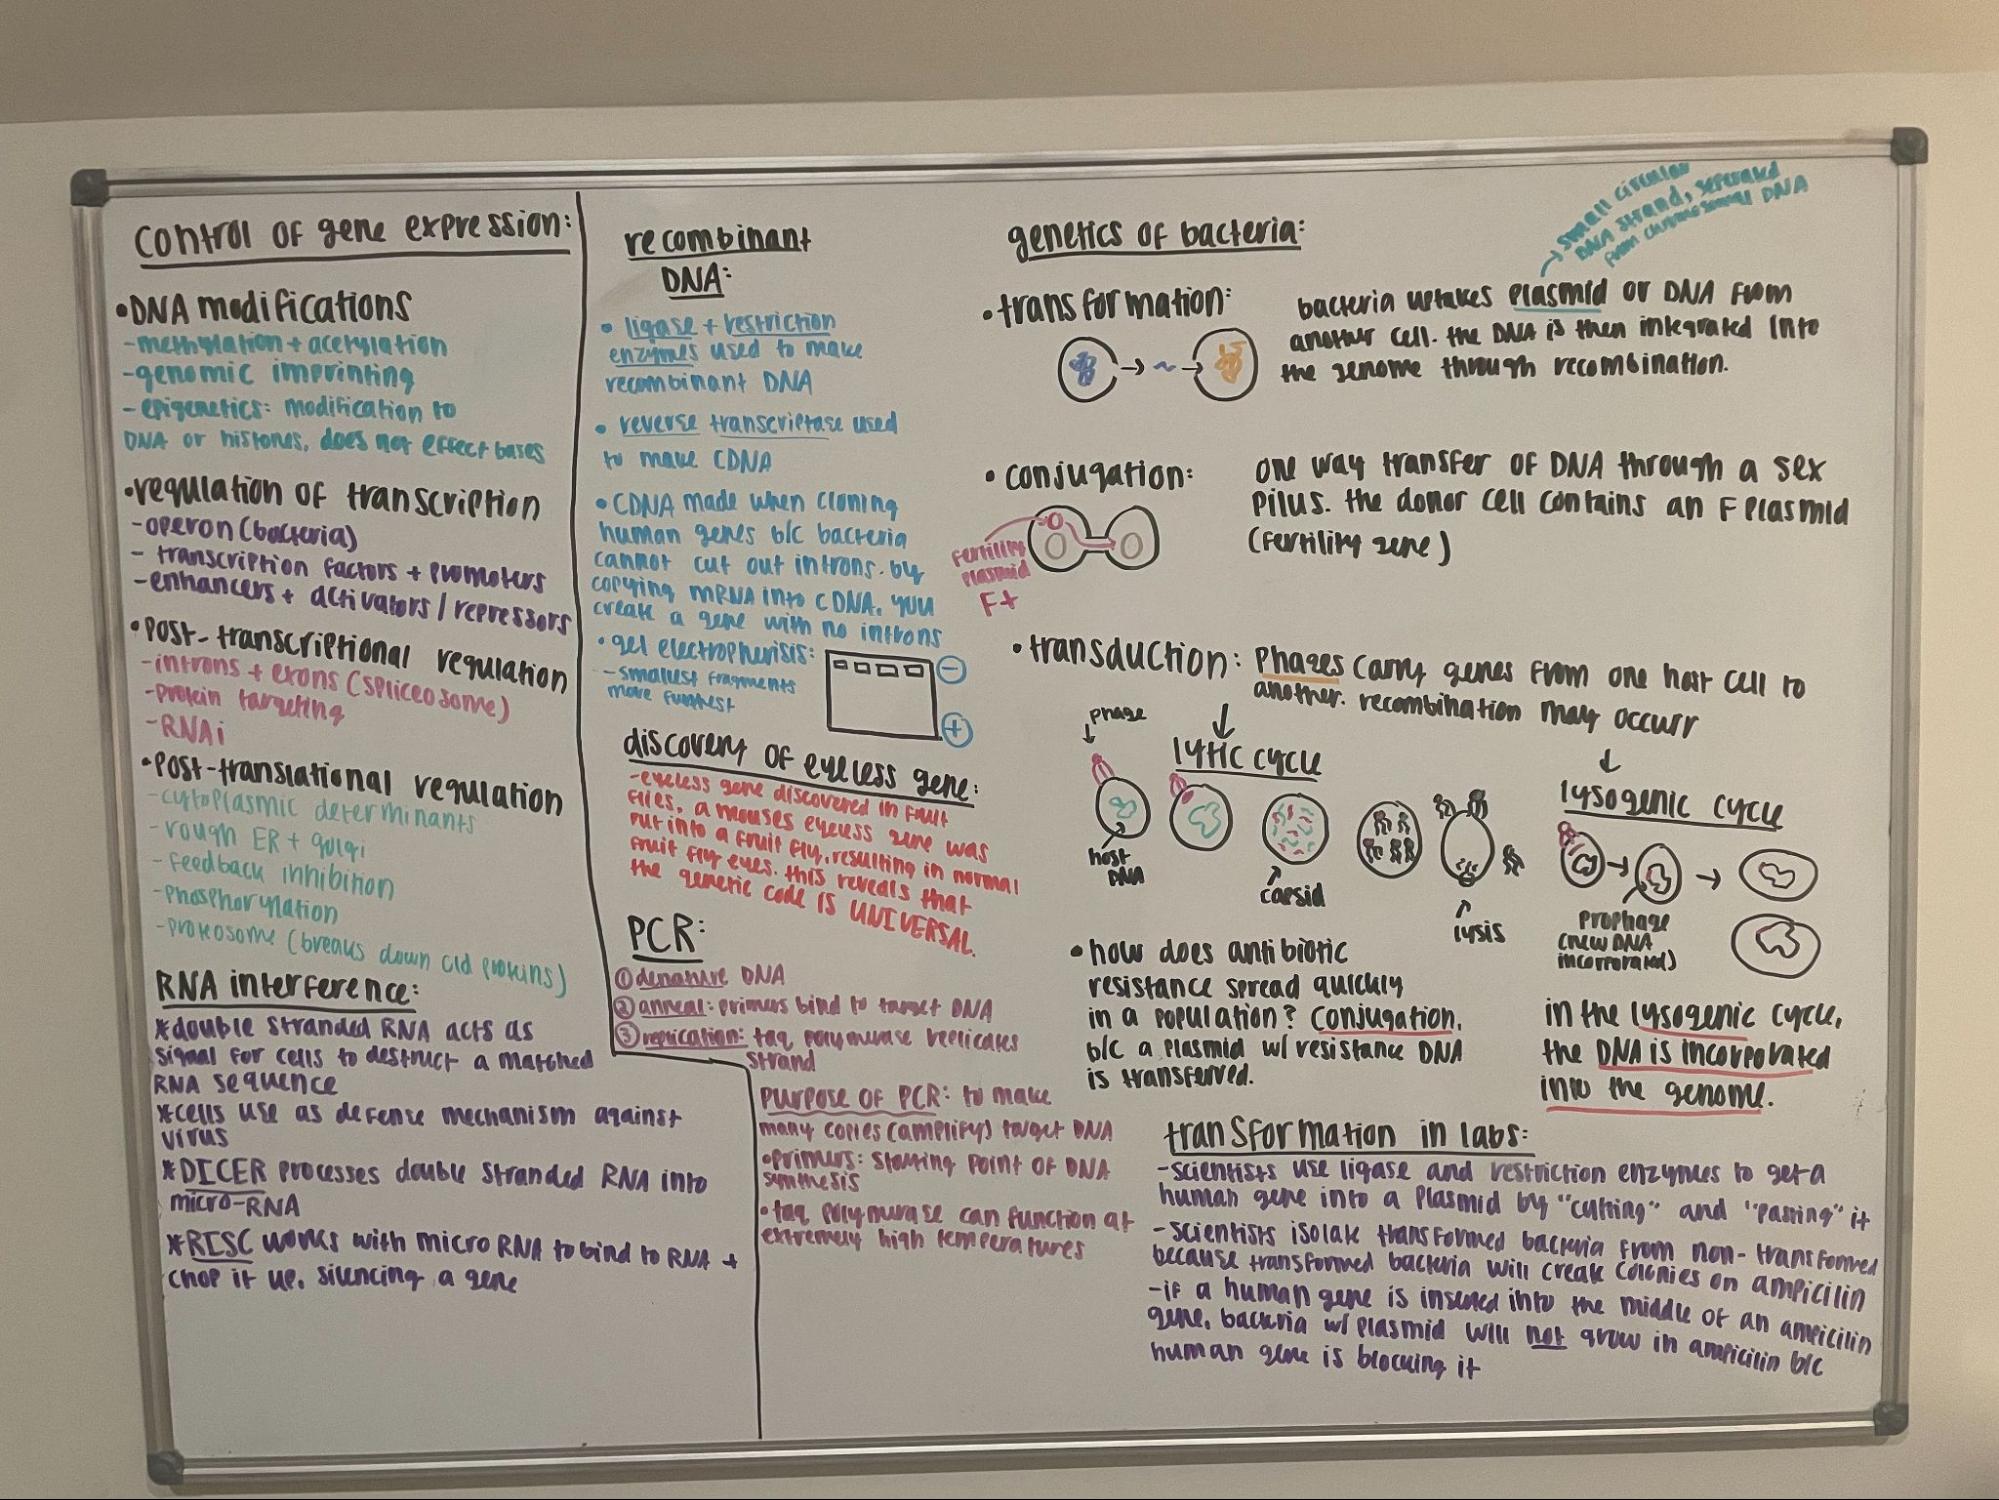 Whiteboarding 101: How a Simple Board Transformed My Academic